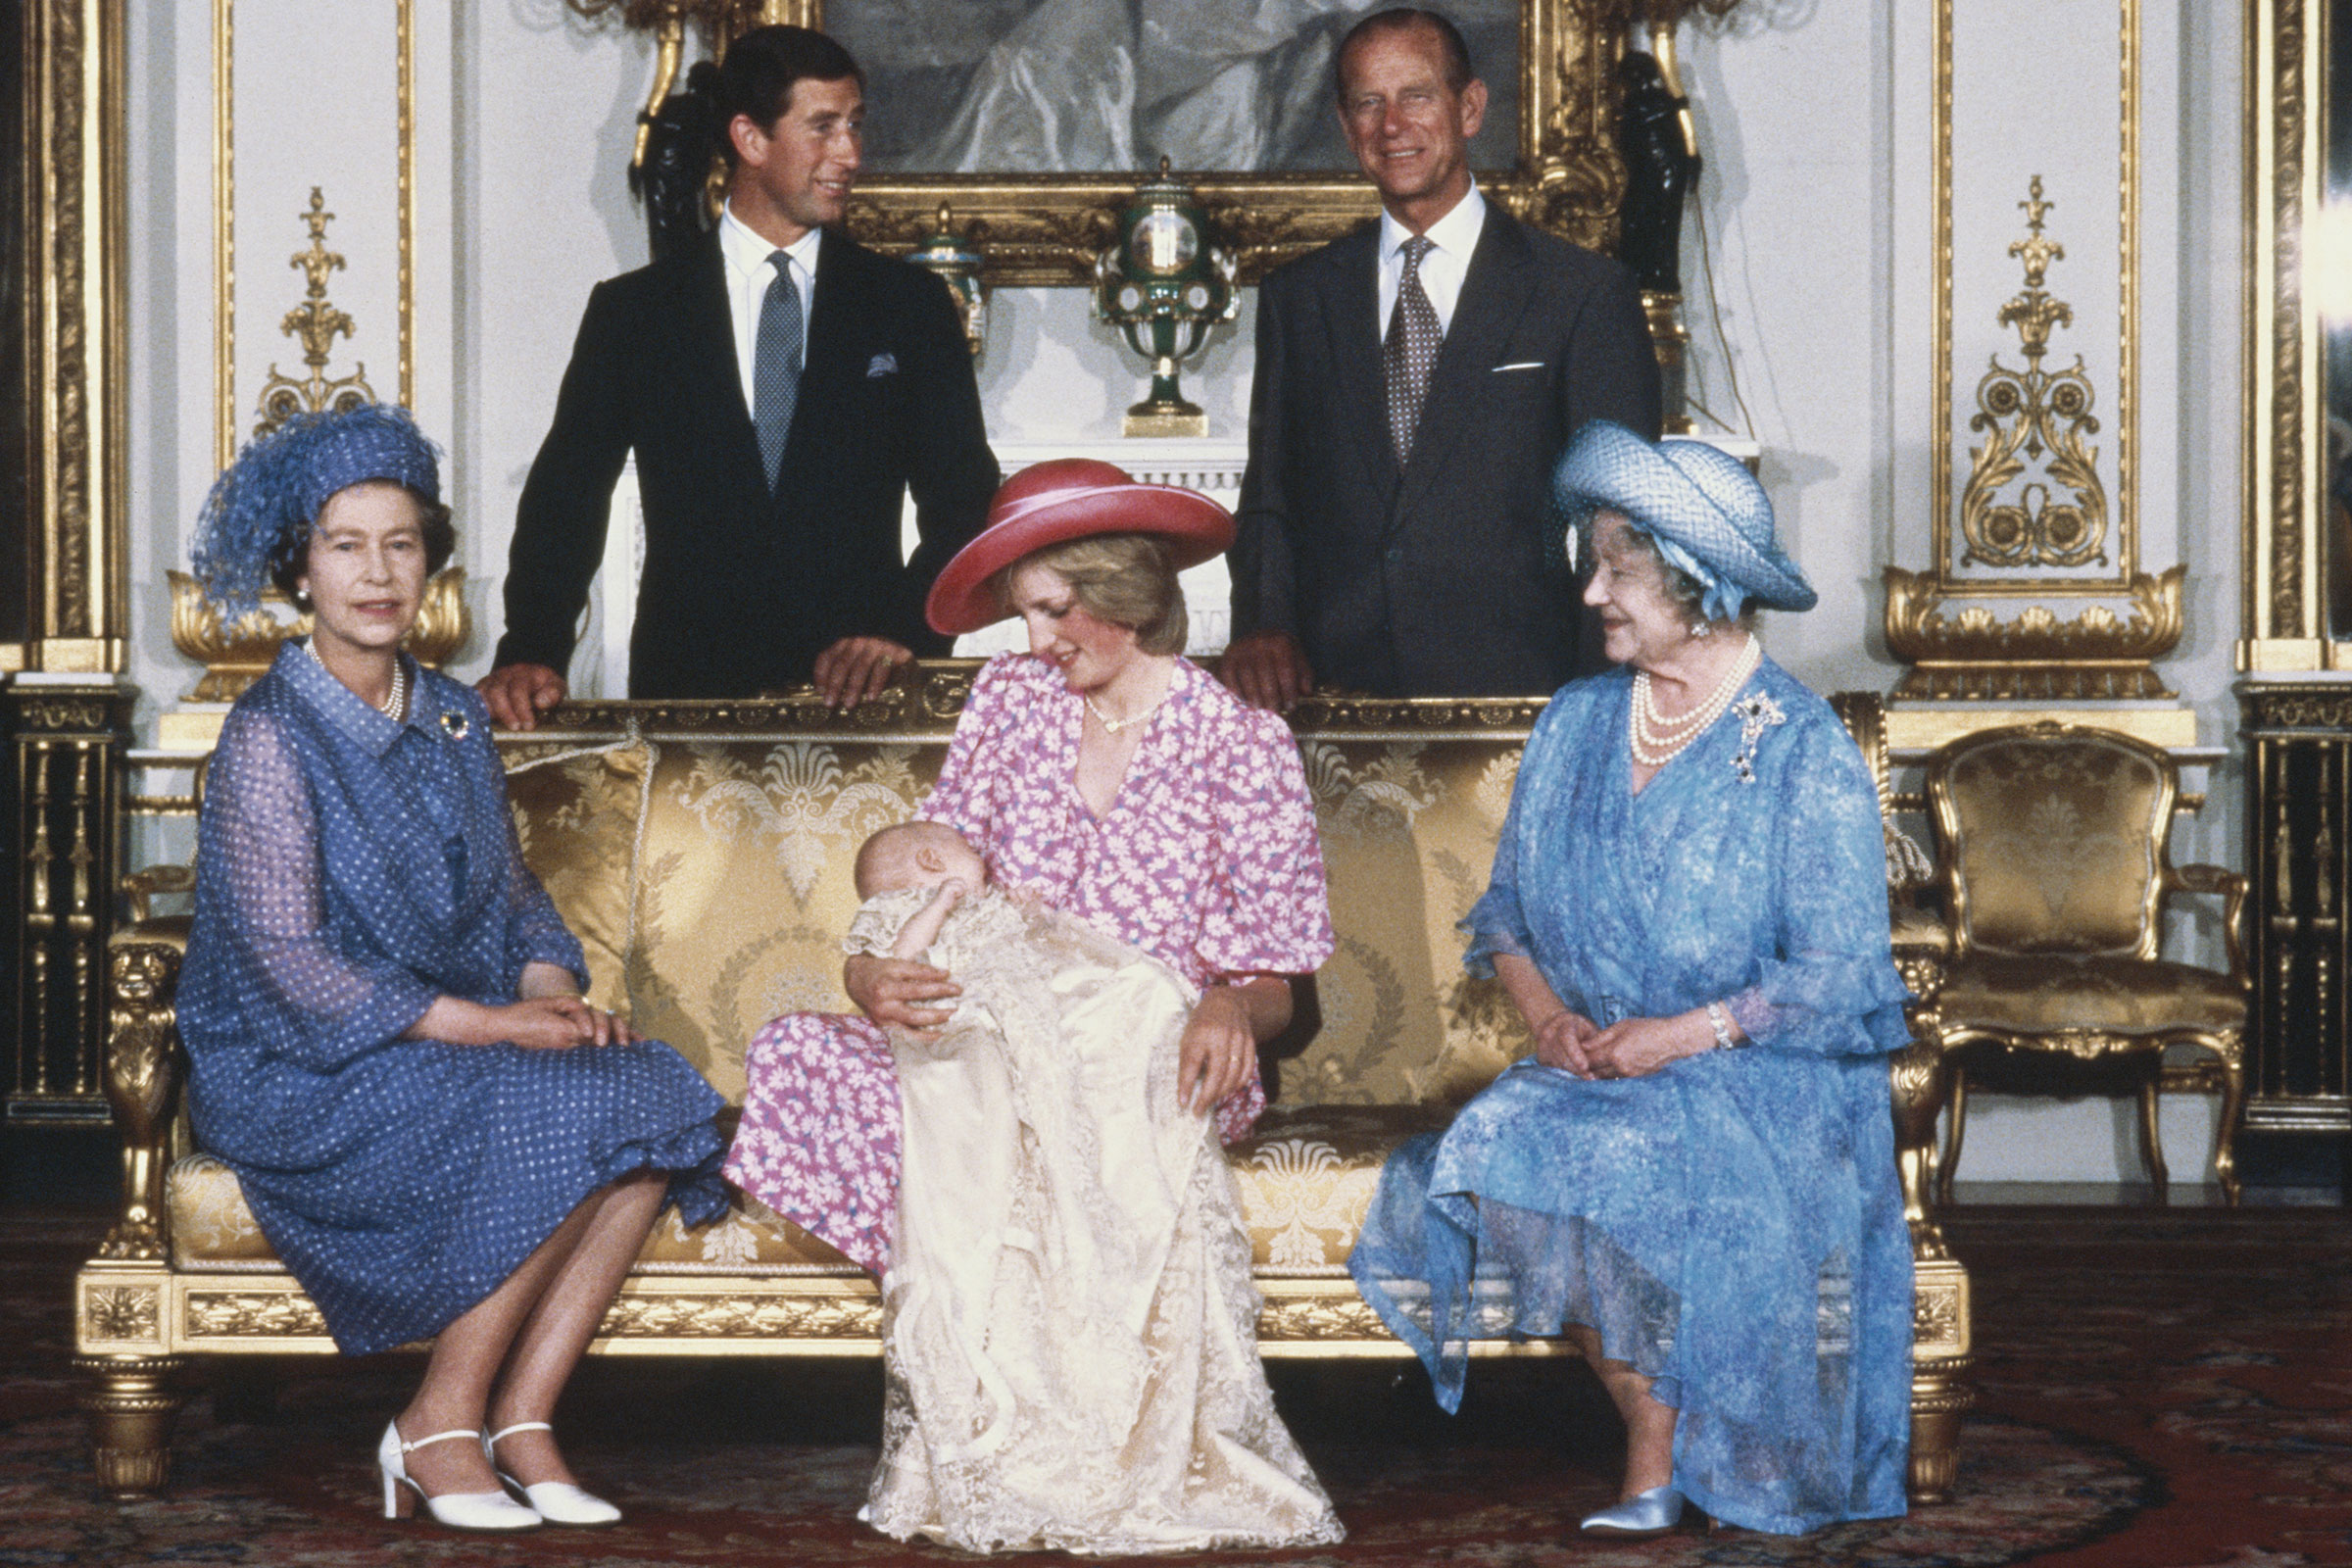 Diana, Princess of Wales holding her son Prince William with Charles, Prince of Wales, Prince Philip the Duke of Edinburgh, Queen Elizabeth II and Queen Elizabeth the Queen Mother at Buckingham Palace after Prince William's christening ceremony on Aug. 4, 1982. (Tim Graham Photo Library/Getty Images)